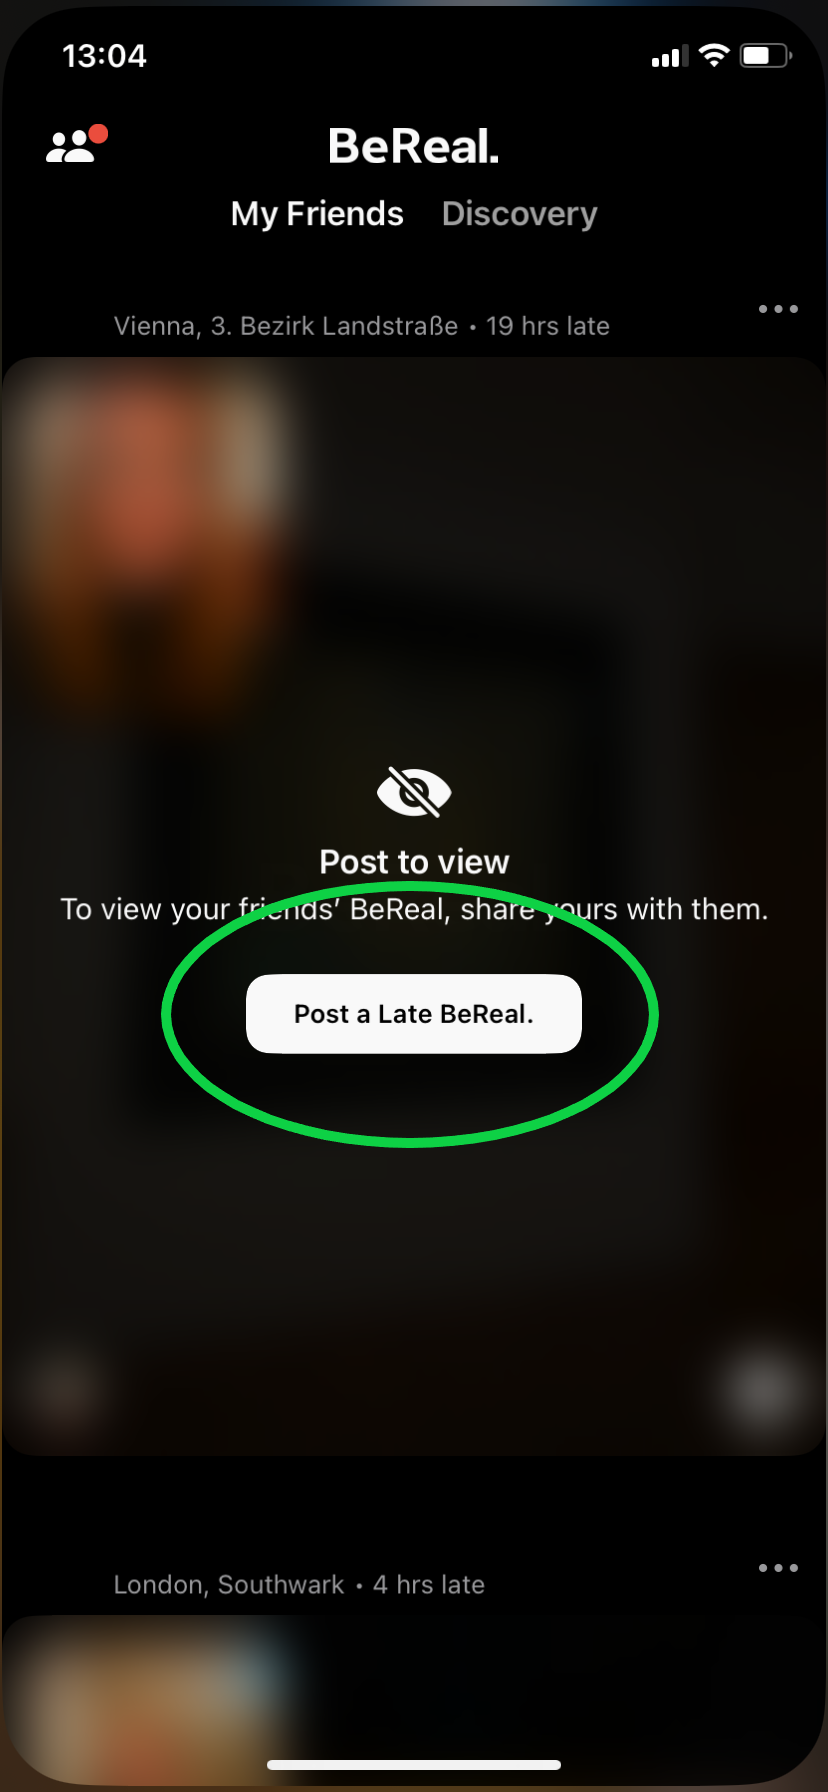 How to turn off location sharing in BeReal